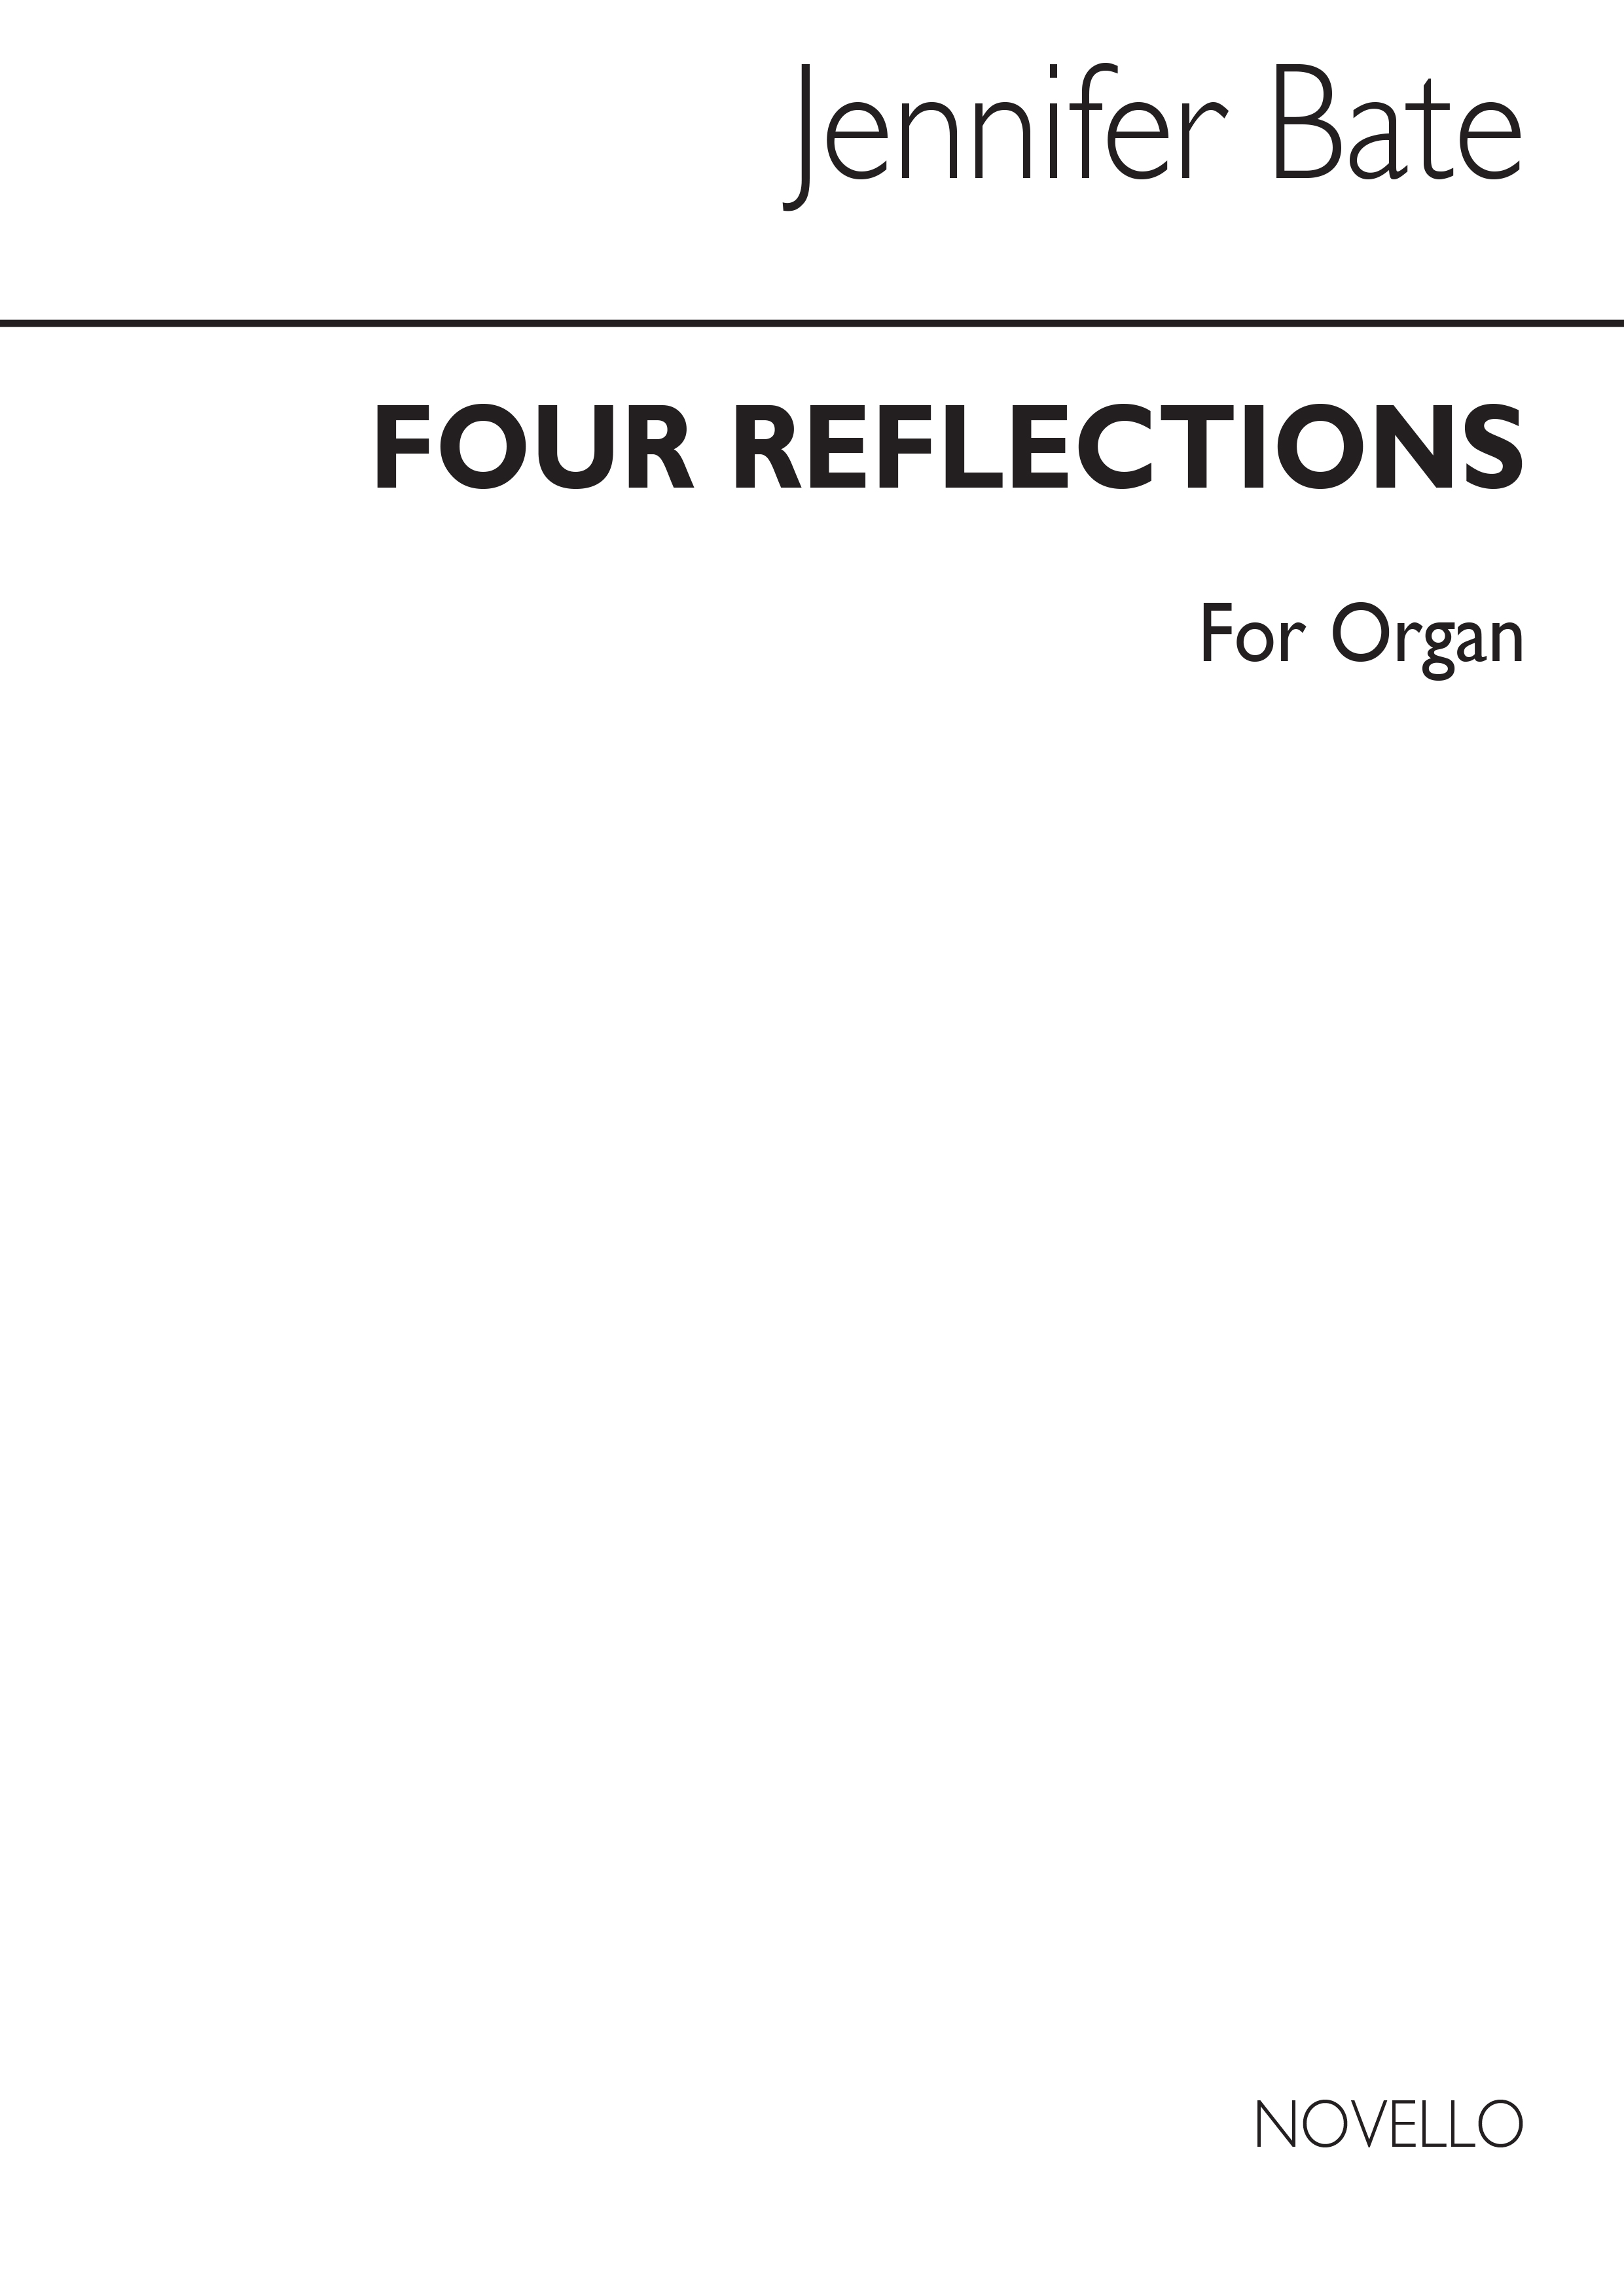 Bate: Four Reflections for Organ